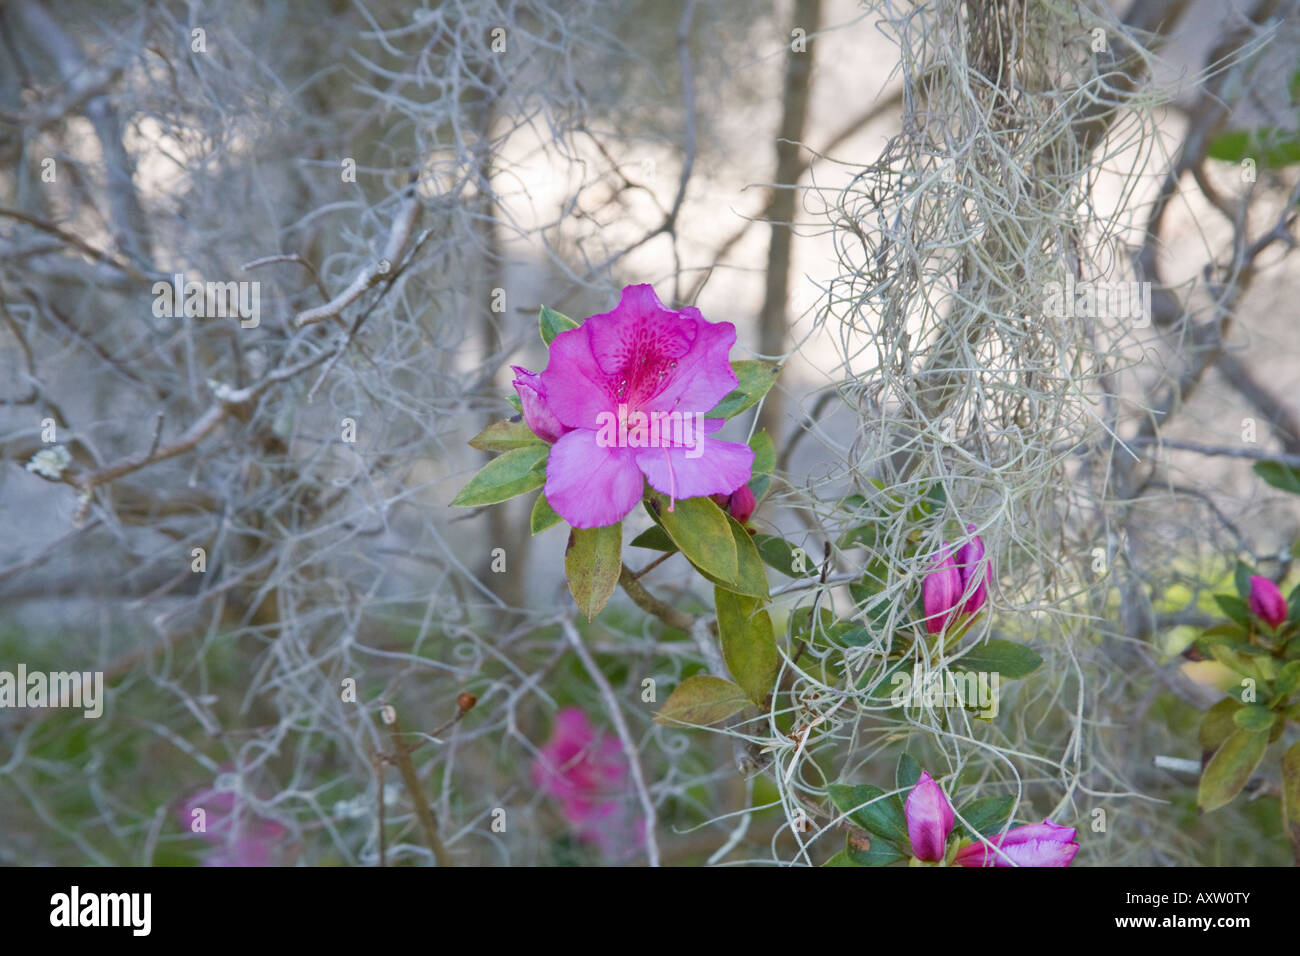 Pink azaleas (rhododendron), native to the Southern United States, growing amongst Spanish moss hanging from live oak trees. Stock Photo